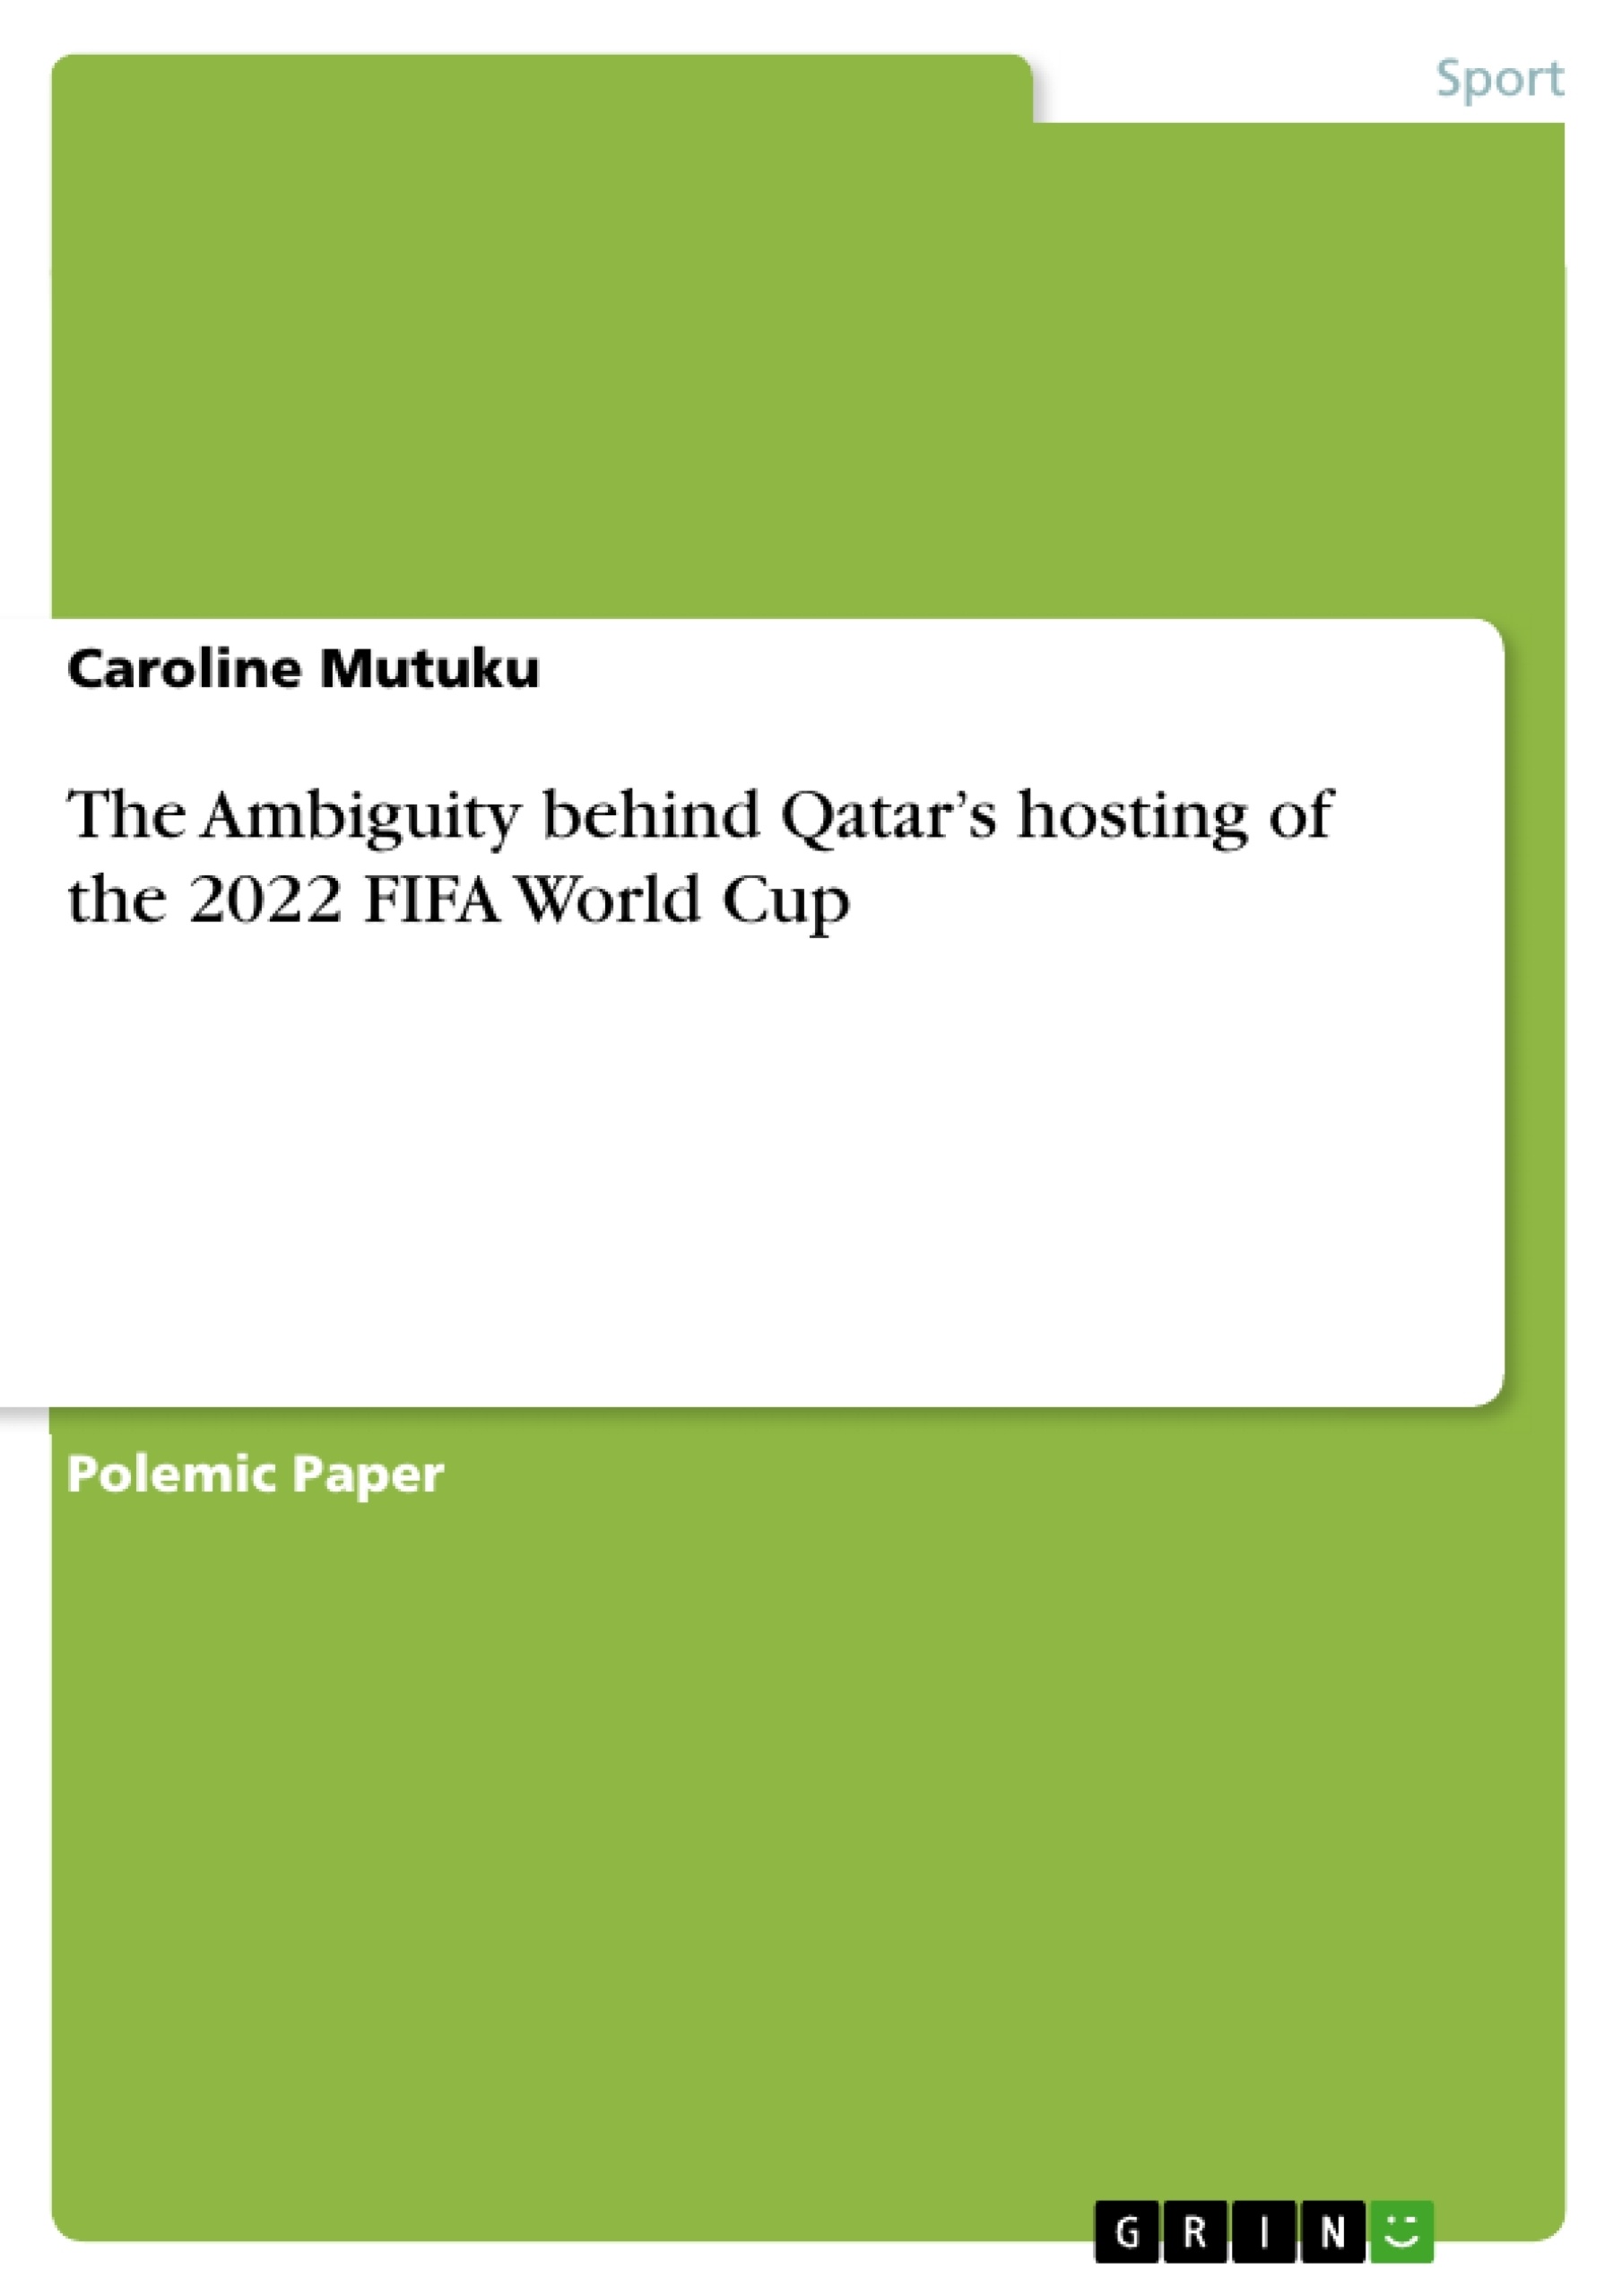 Titre: The Ambiguity behind Qatar’s hosting of the 2022 FIFA World Cup